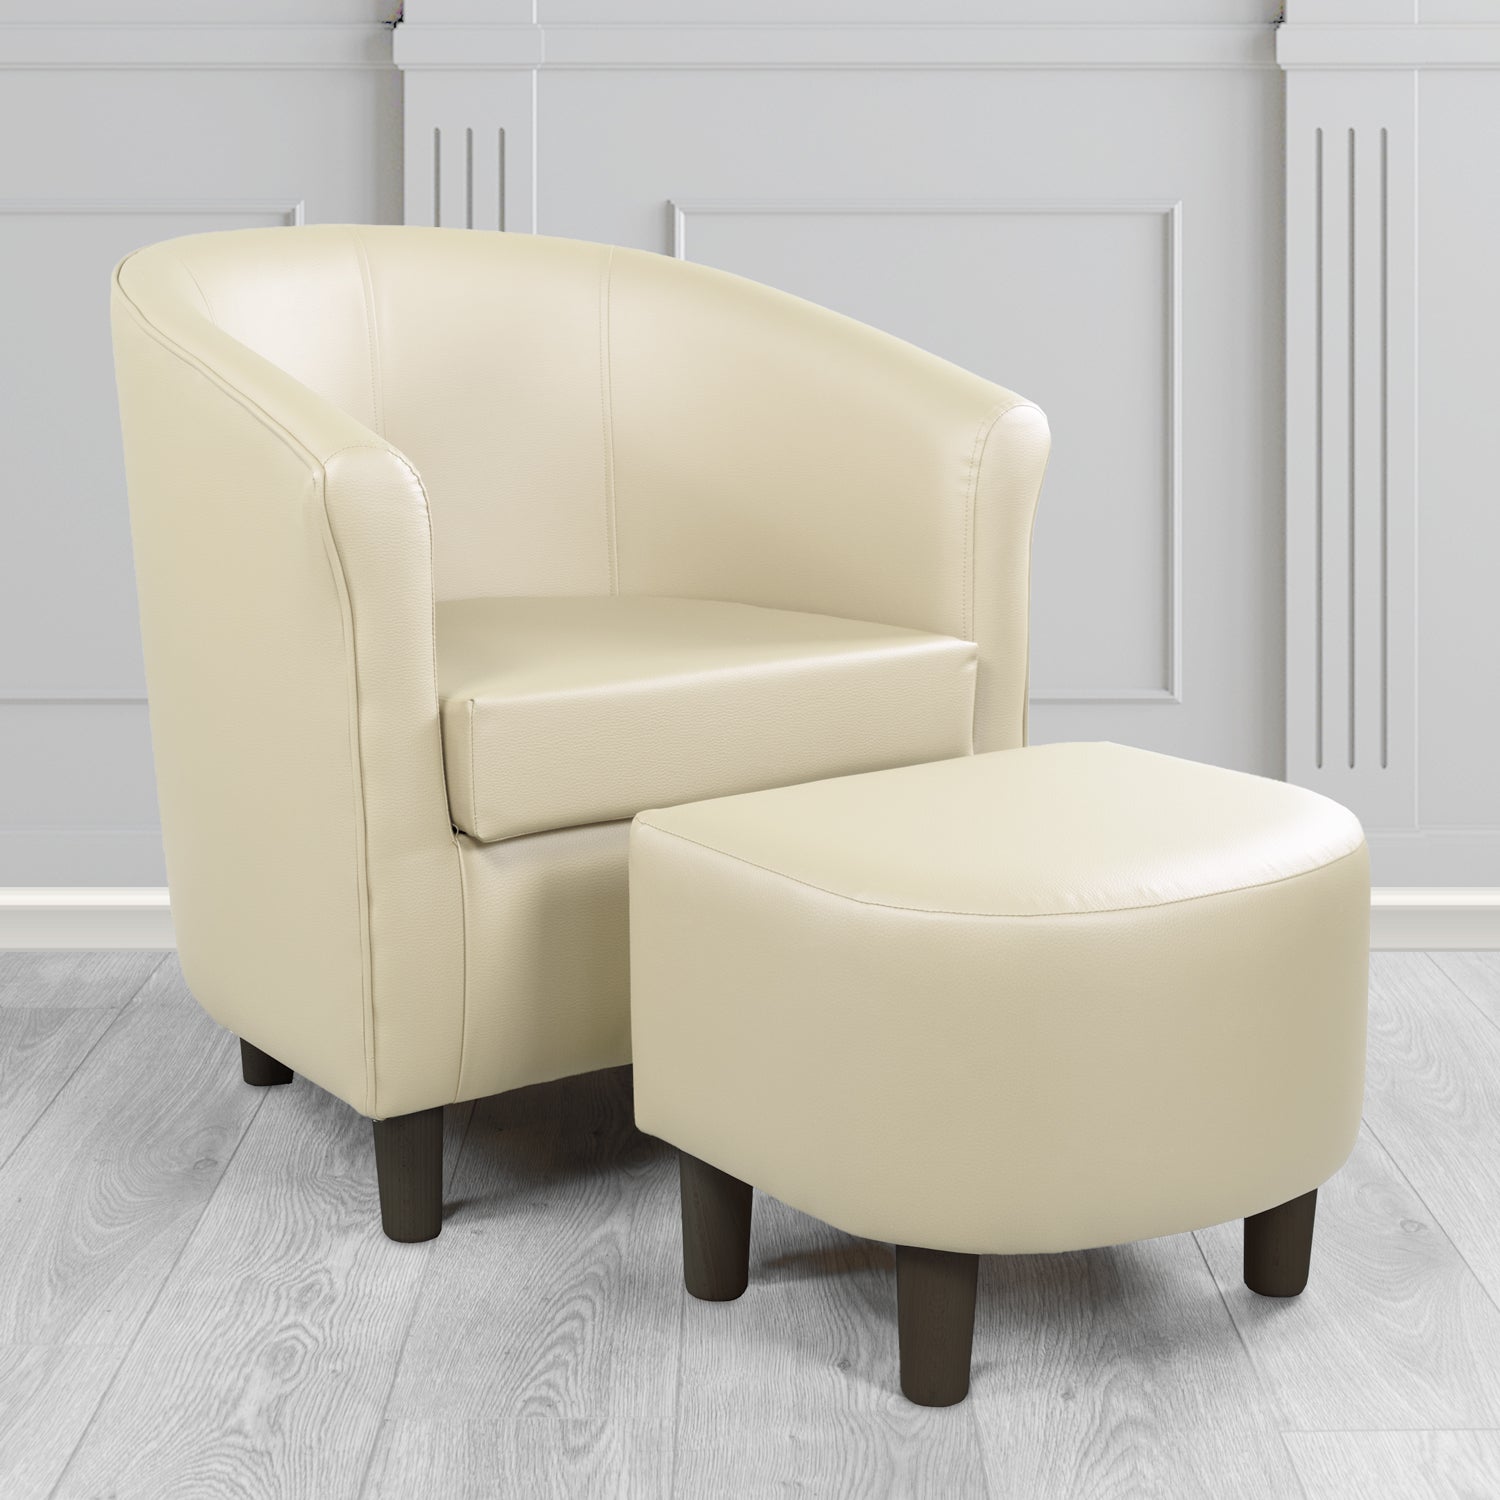 Tuscany Tub Chair with Footstool Set in Madrid Cream Faux Leather